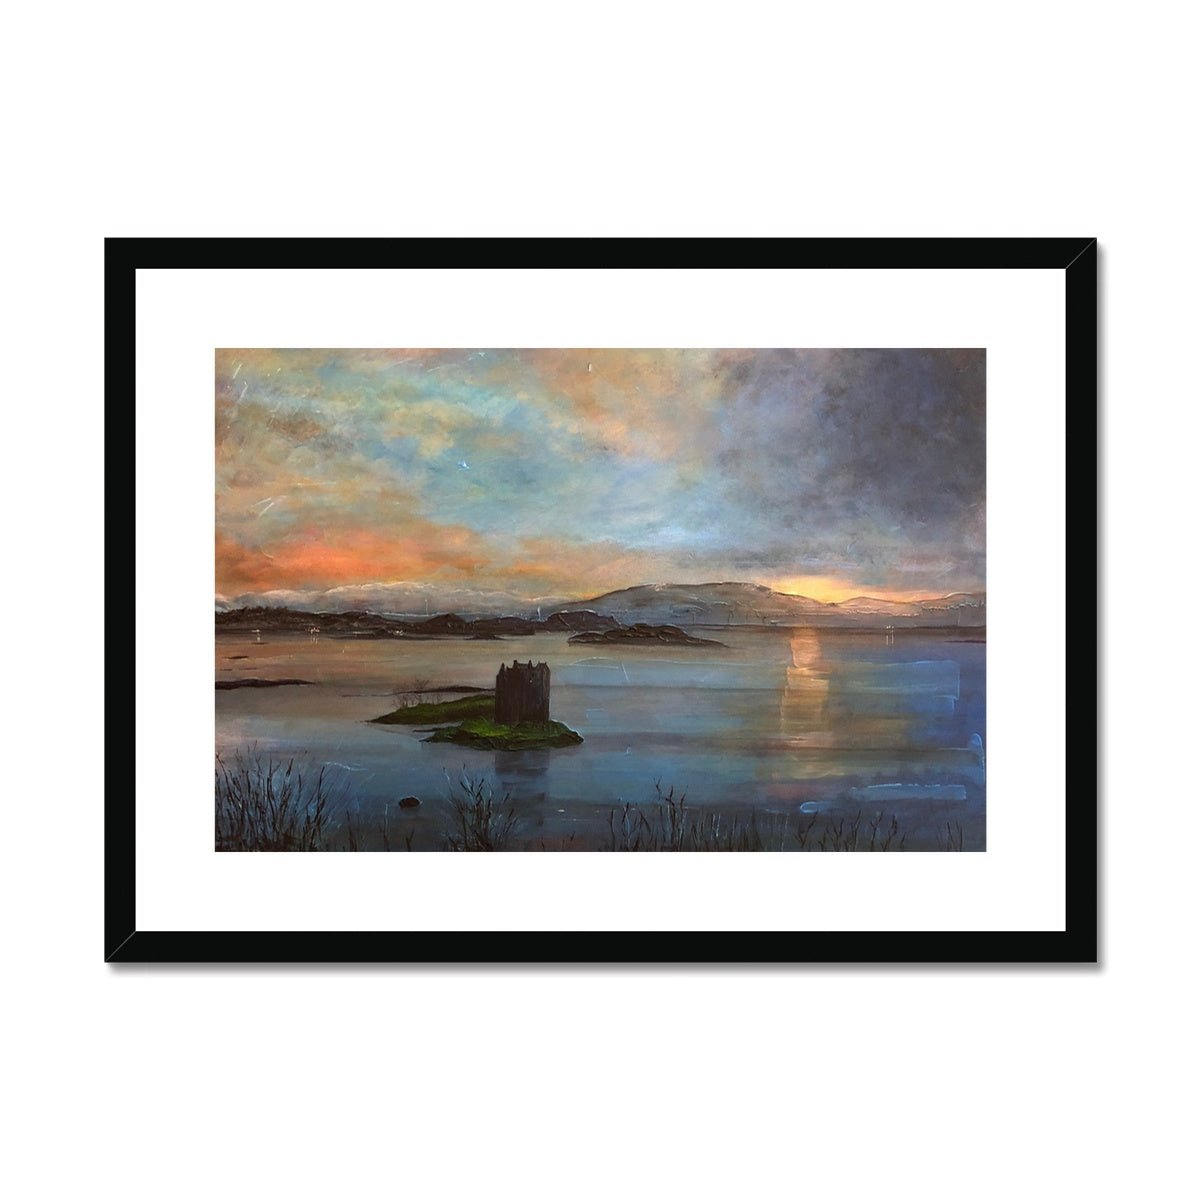 Castle Stalker Twilight Painting | Framed & Mounted Prints From Scotland-Framed & Mounted Prints-Historic & Iconic Scotland Art Gallery-A2 Landscape-Black Frame-Paintings, Prints, Homeware, Art Gifts From Scotland By Scottish Artist Kevin Hunter